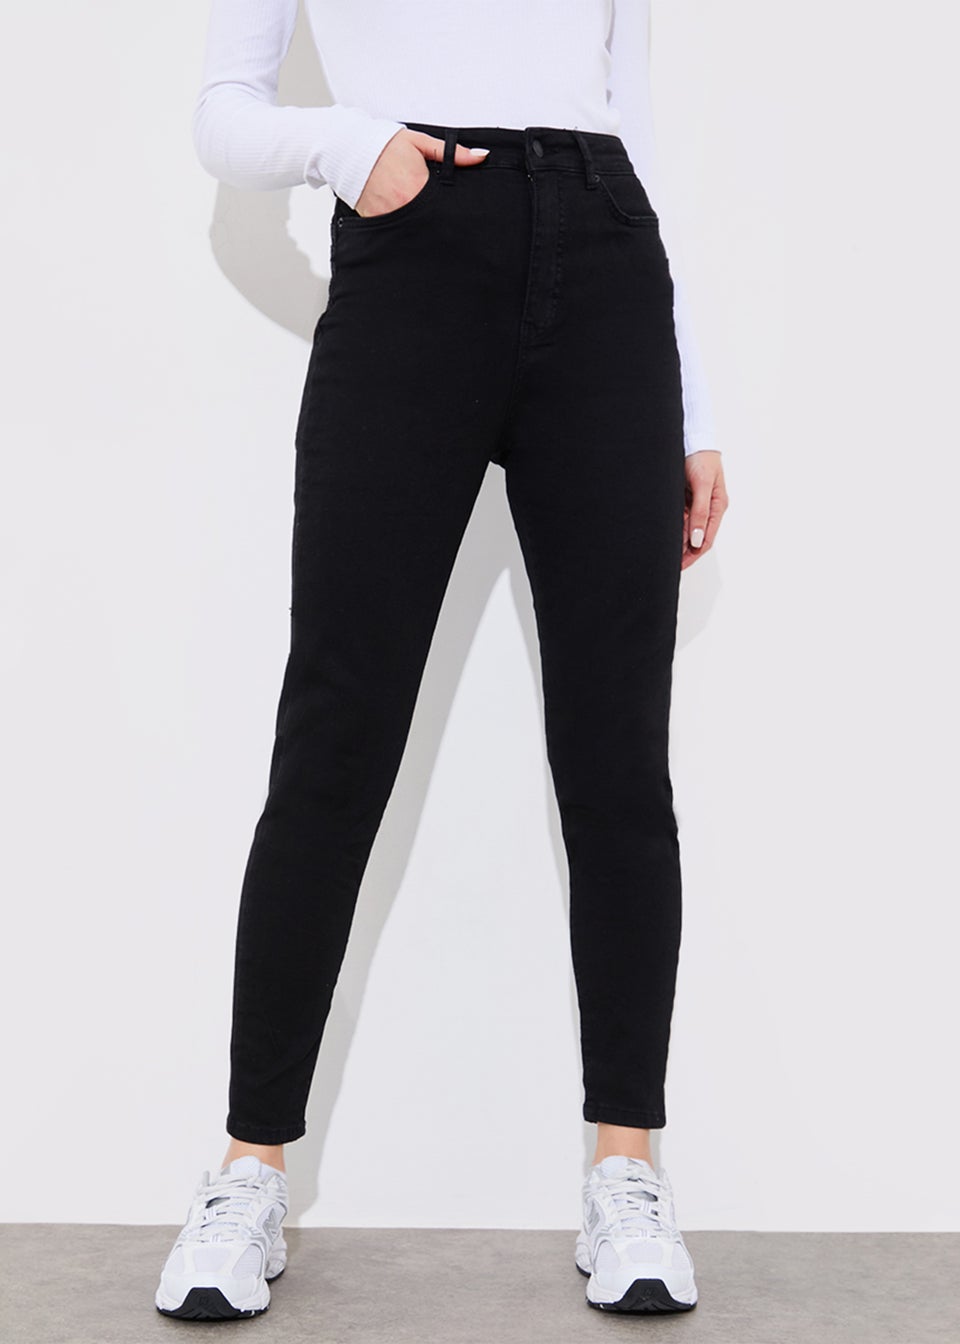 In the Style Jac Jossa Black Smoothing Jeans - Matalan